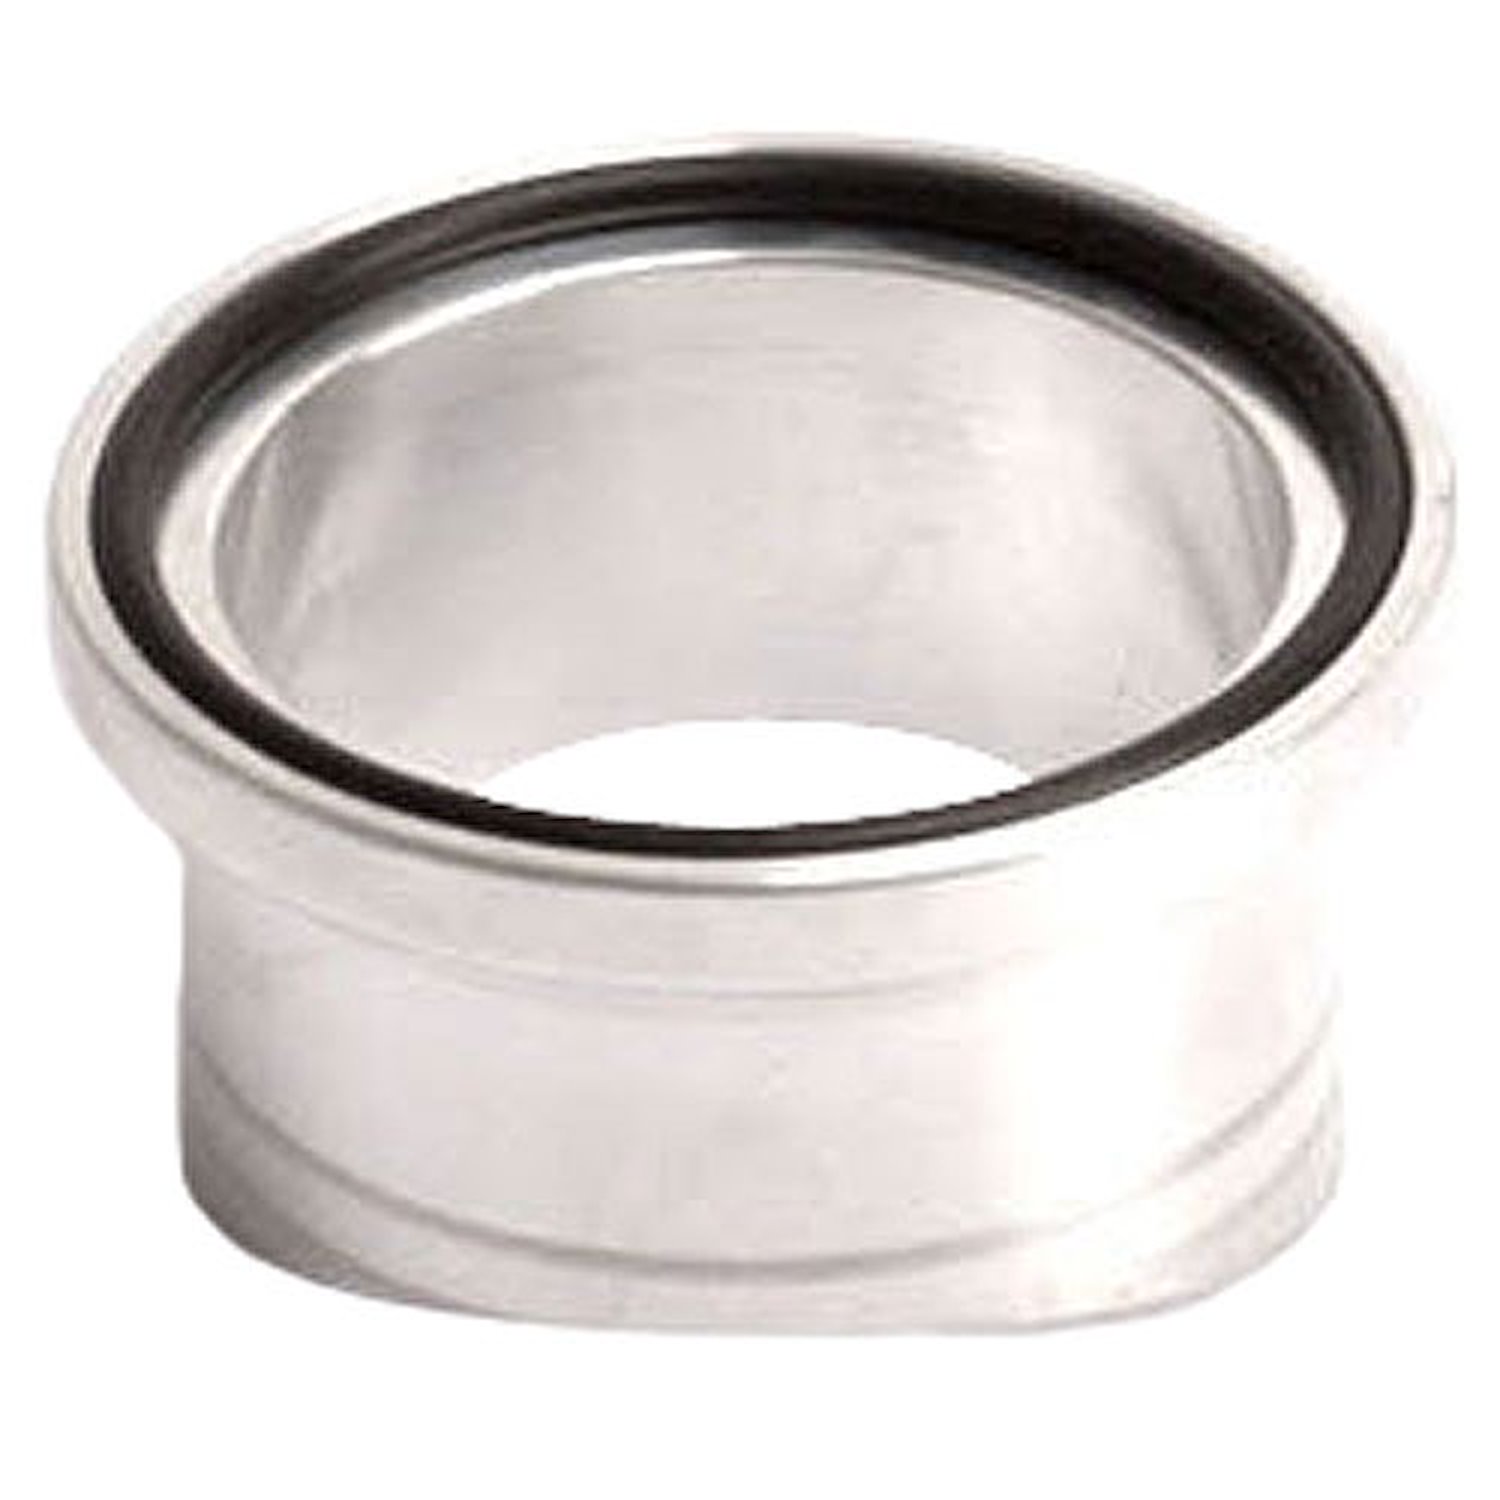 38mm Profiled BOV Adapter Stainless Steel